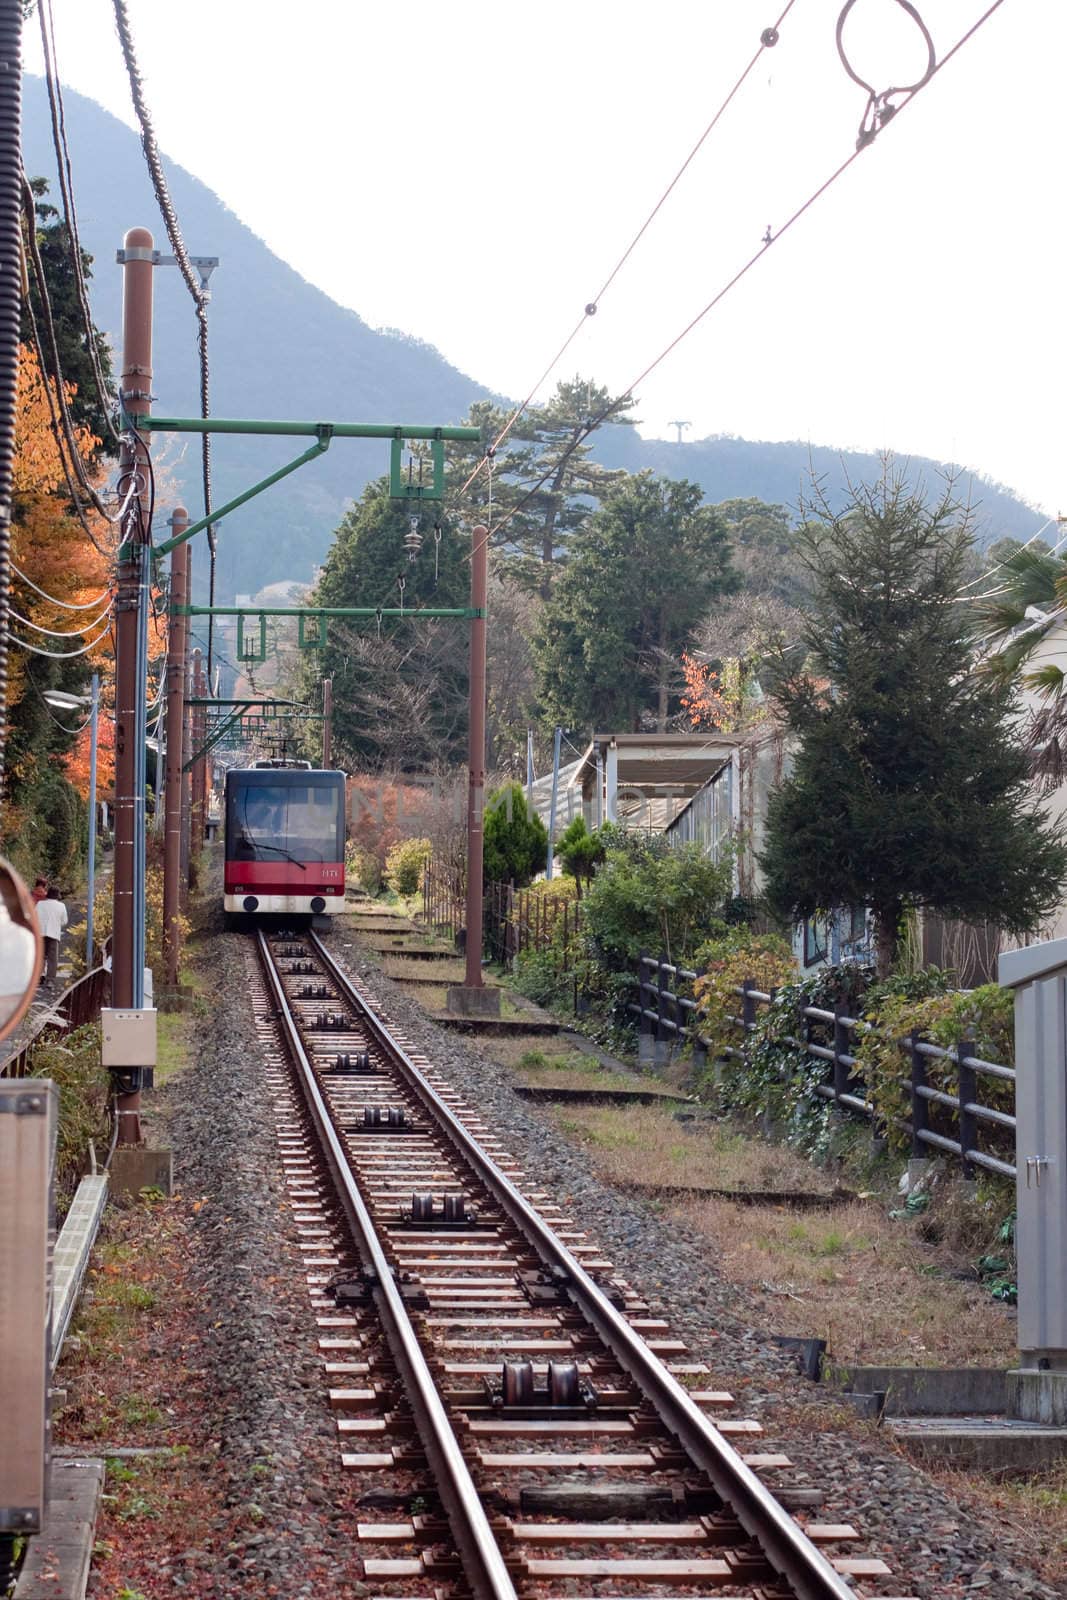 A railway in japanese mouintains with red train
